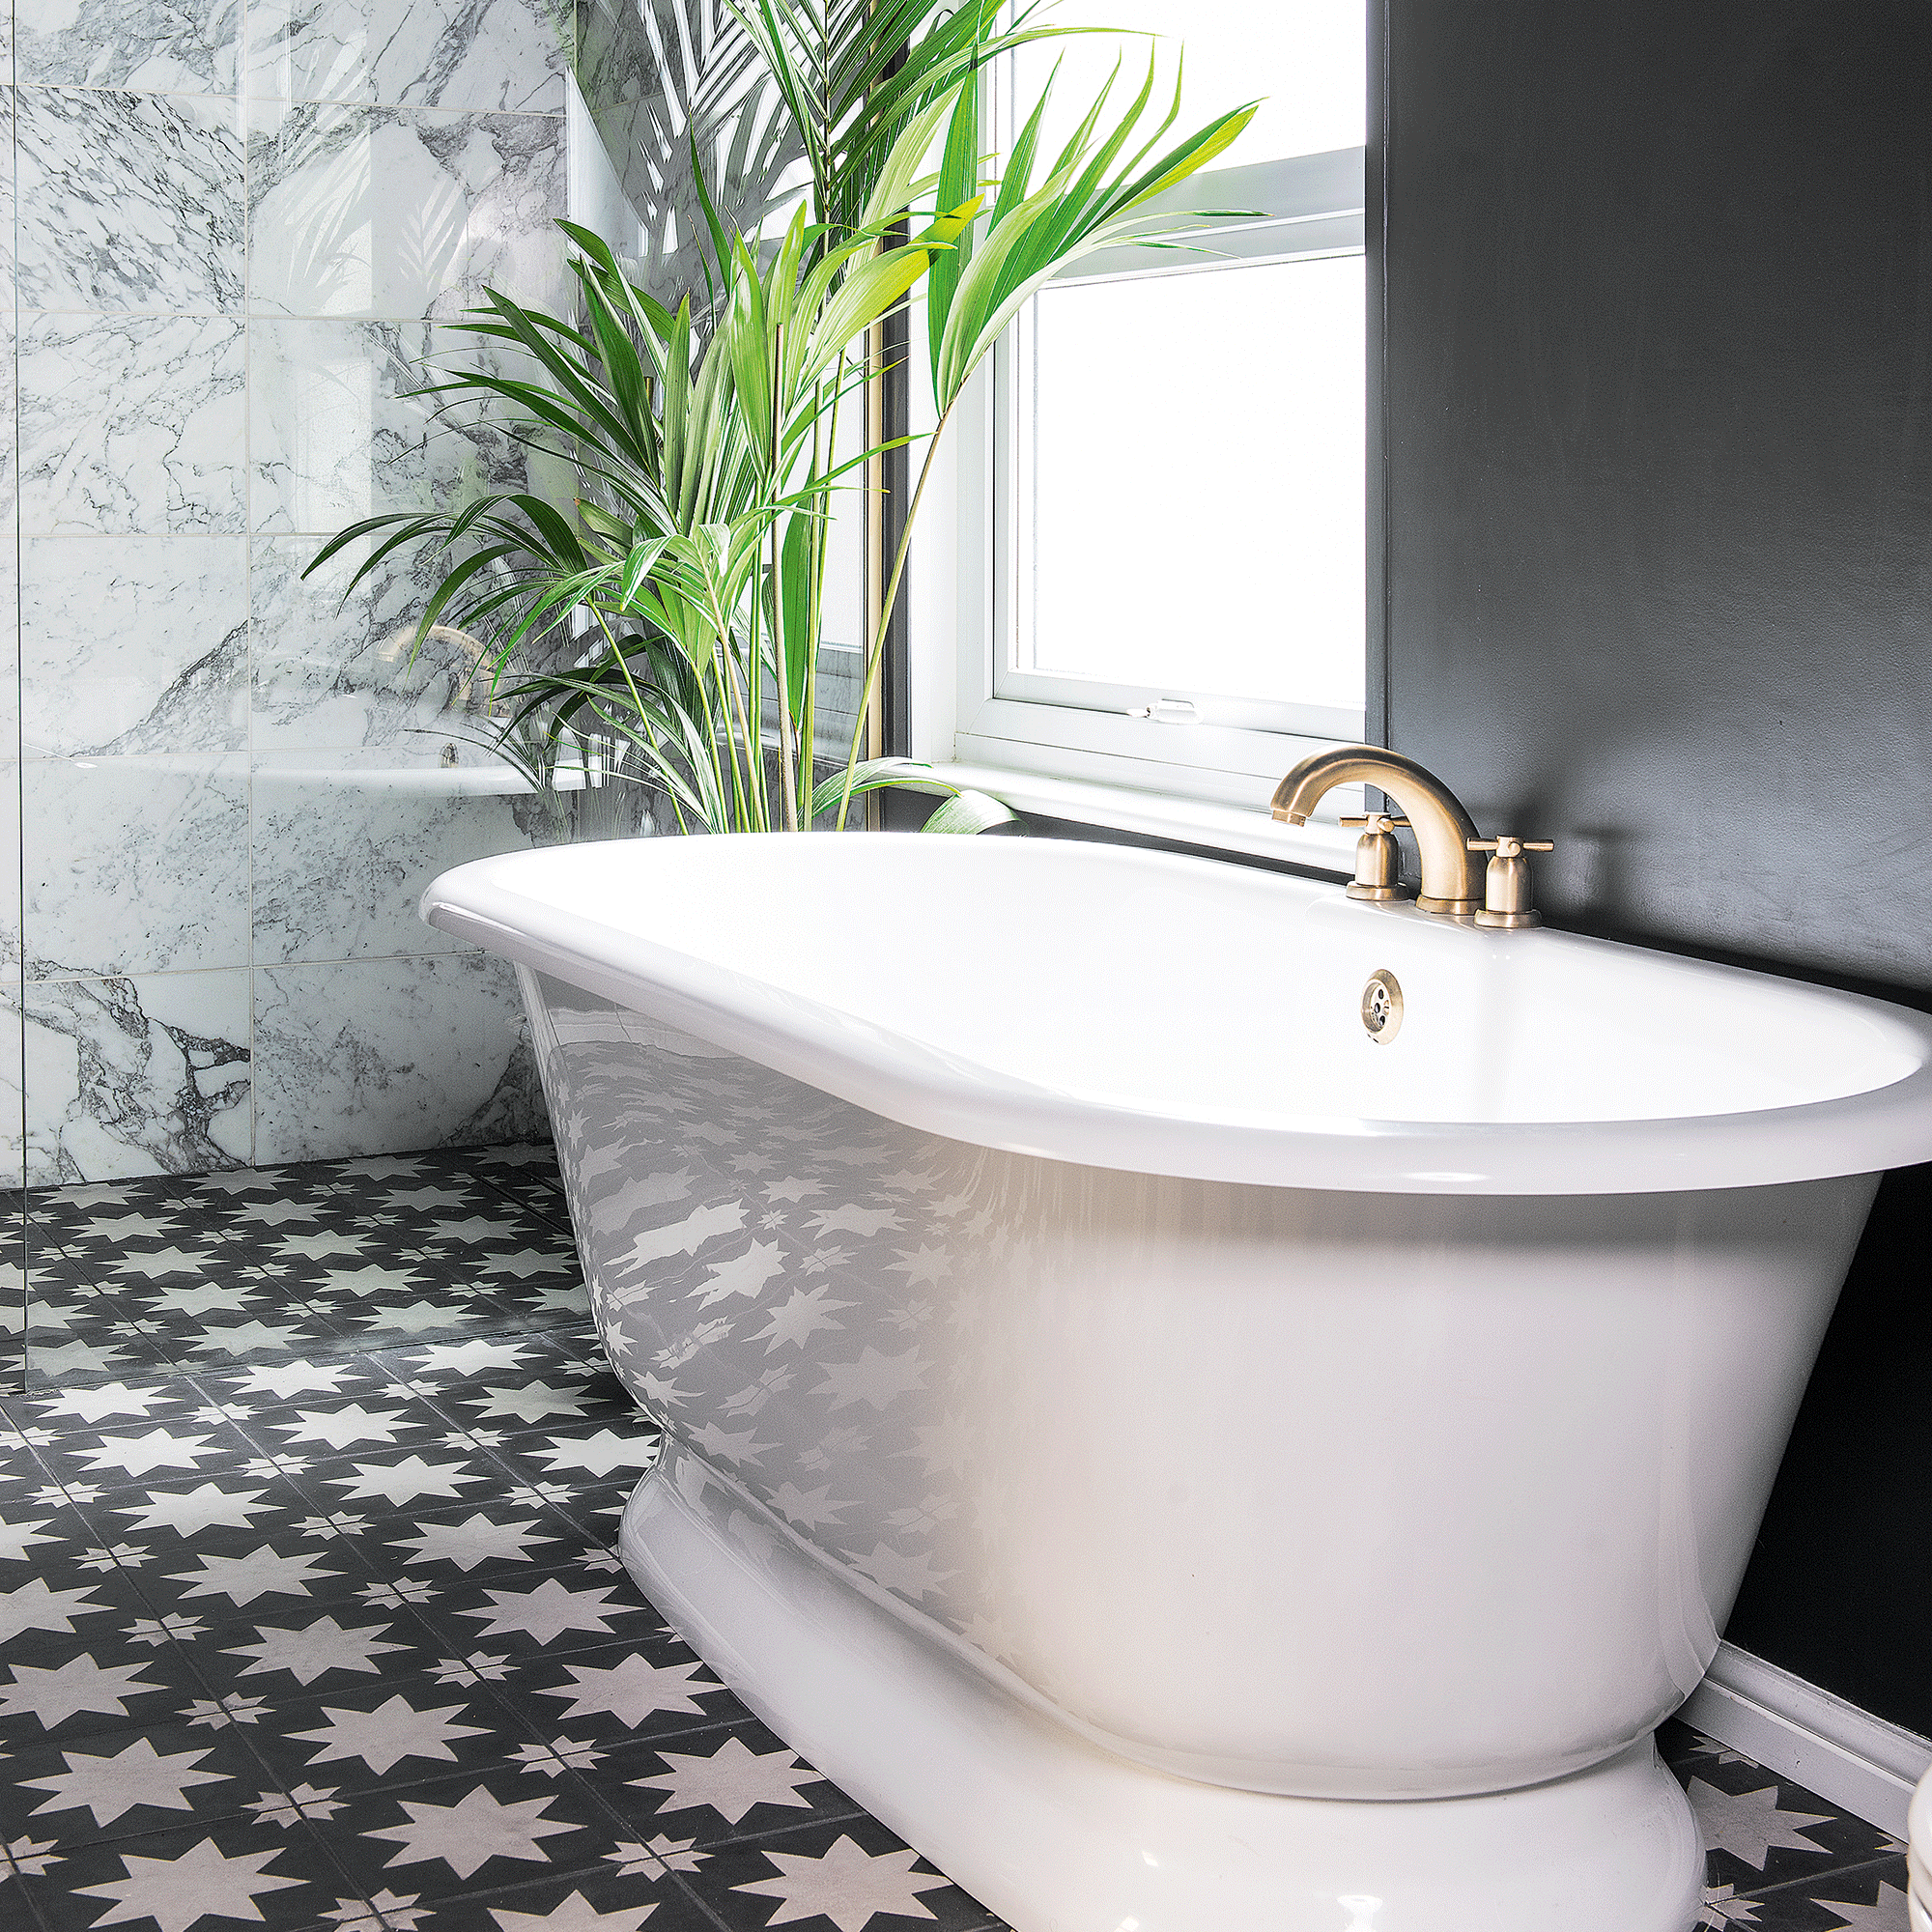 White freestanding bath with gold taps and plant